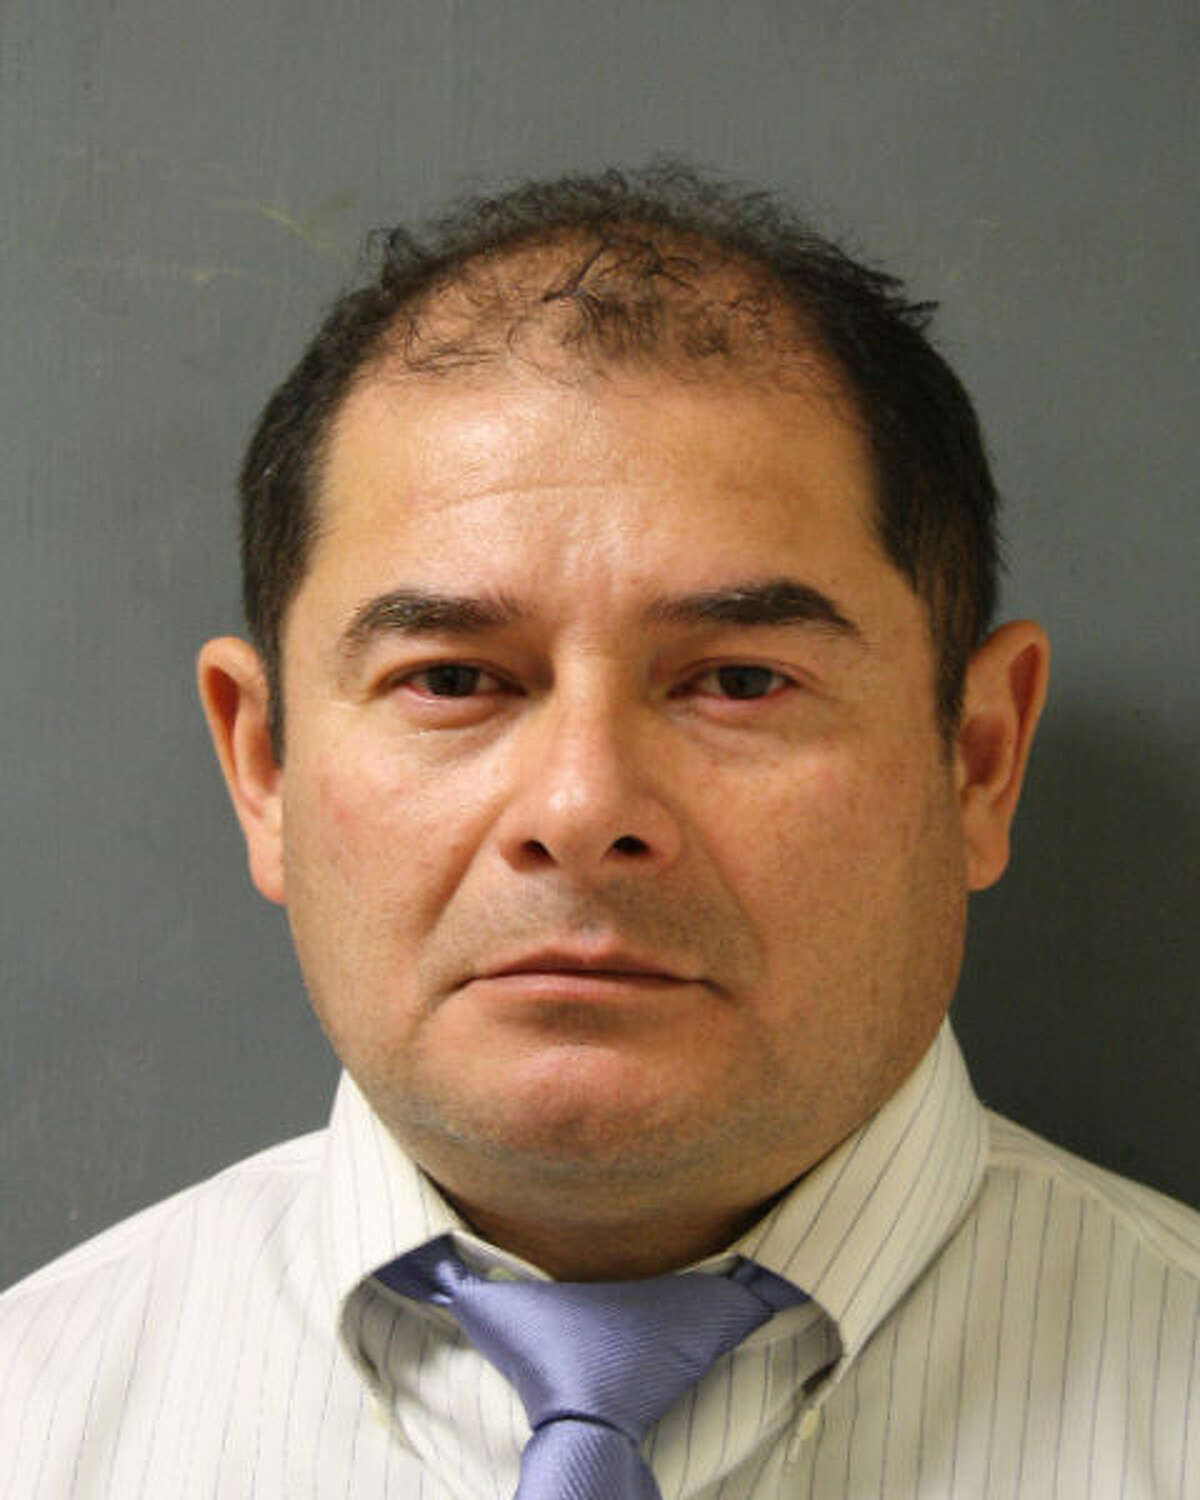 Aldo Leiva, 51, faces a felony charge of sexual performance by a child and possession of child pornography after an investigation by Houston Independent School District police. (Harris County Sheriff's Office)